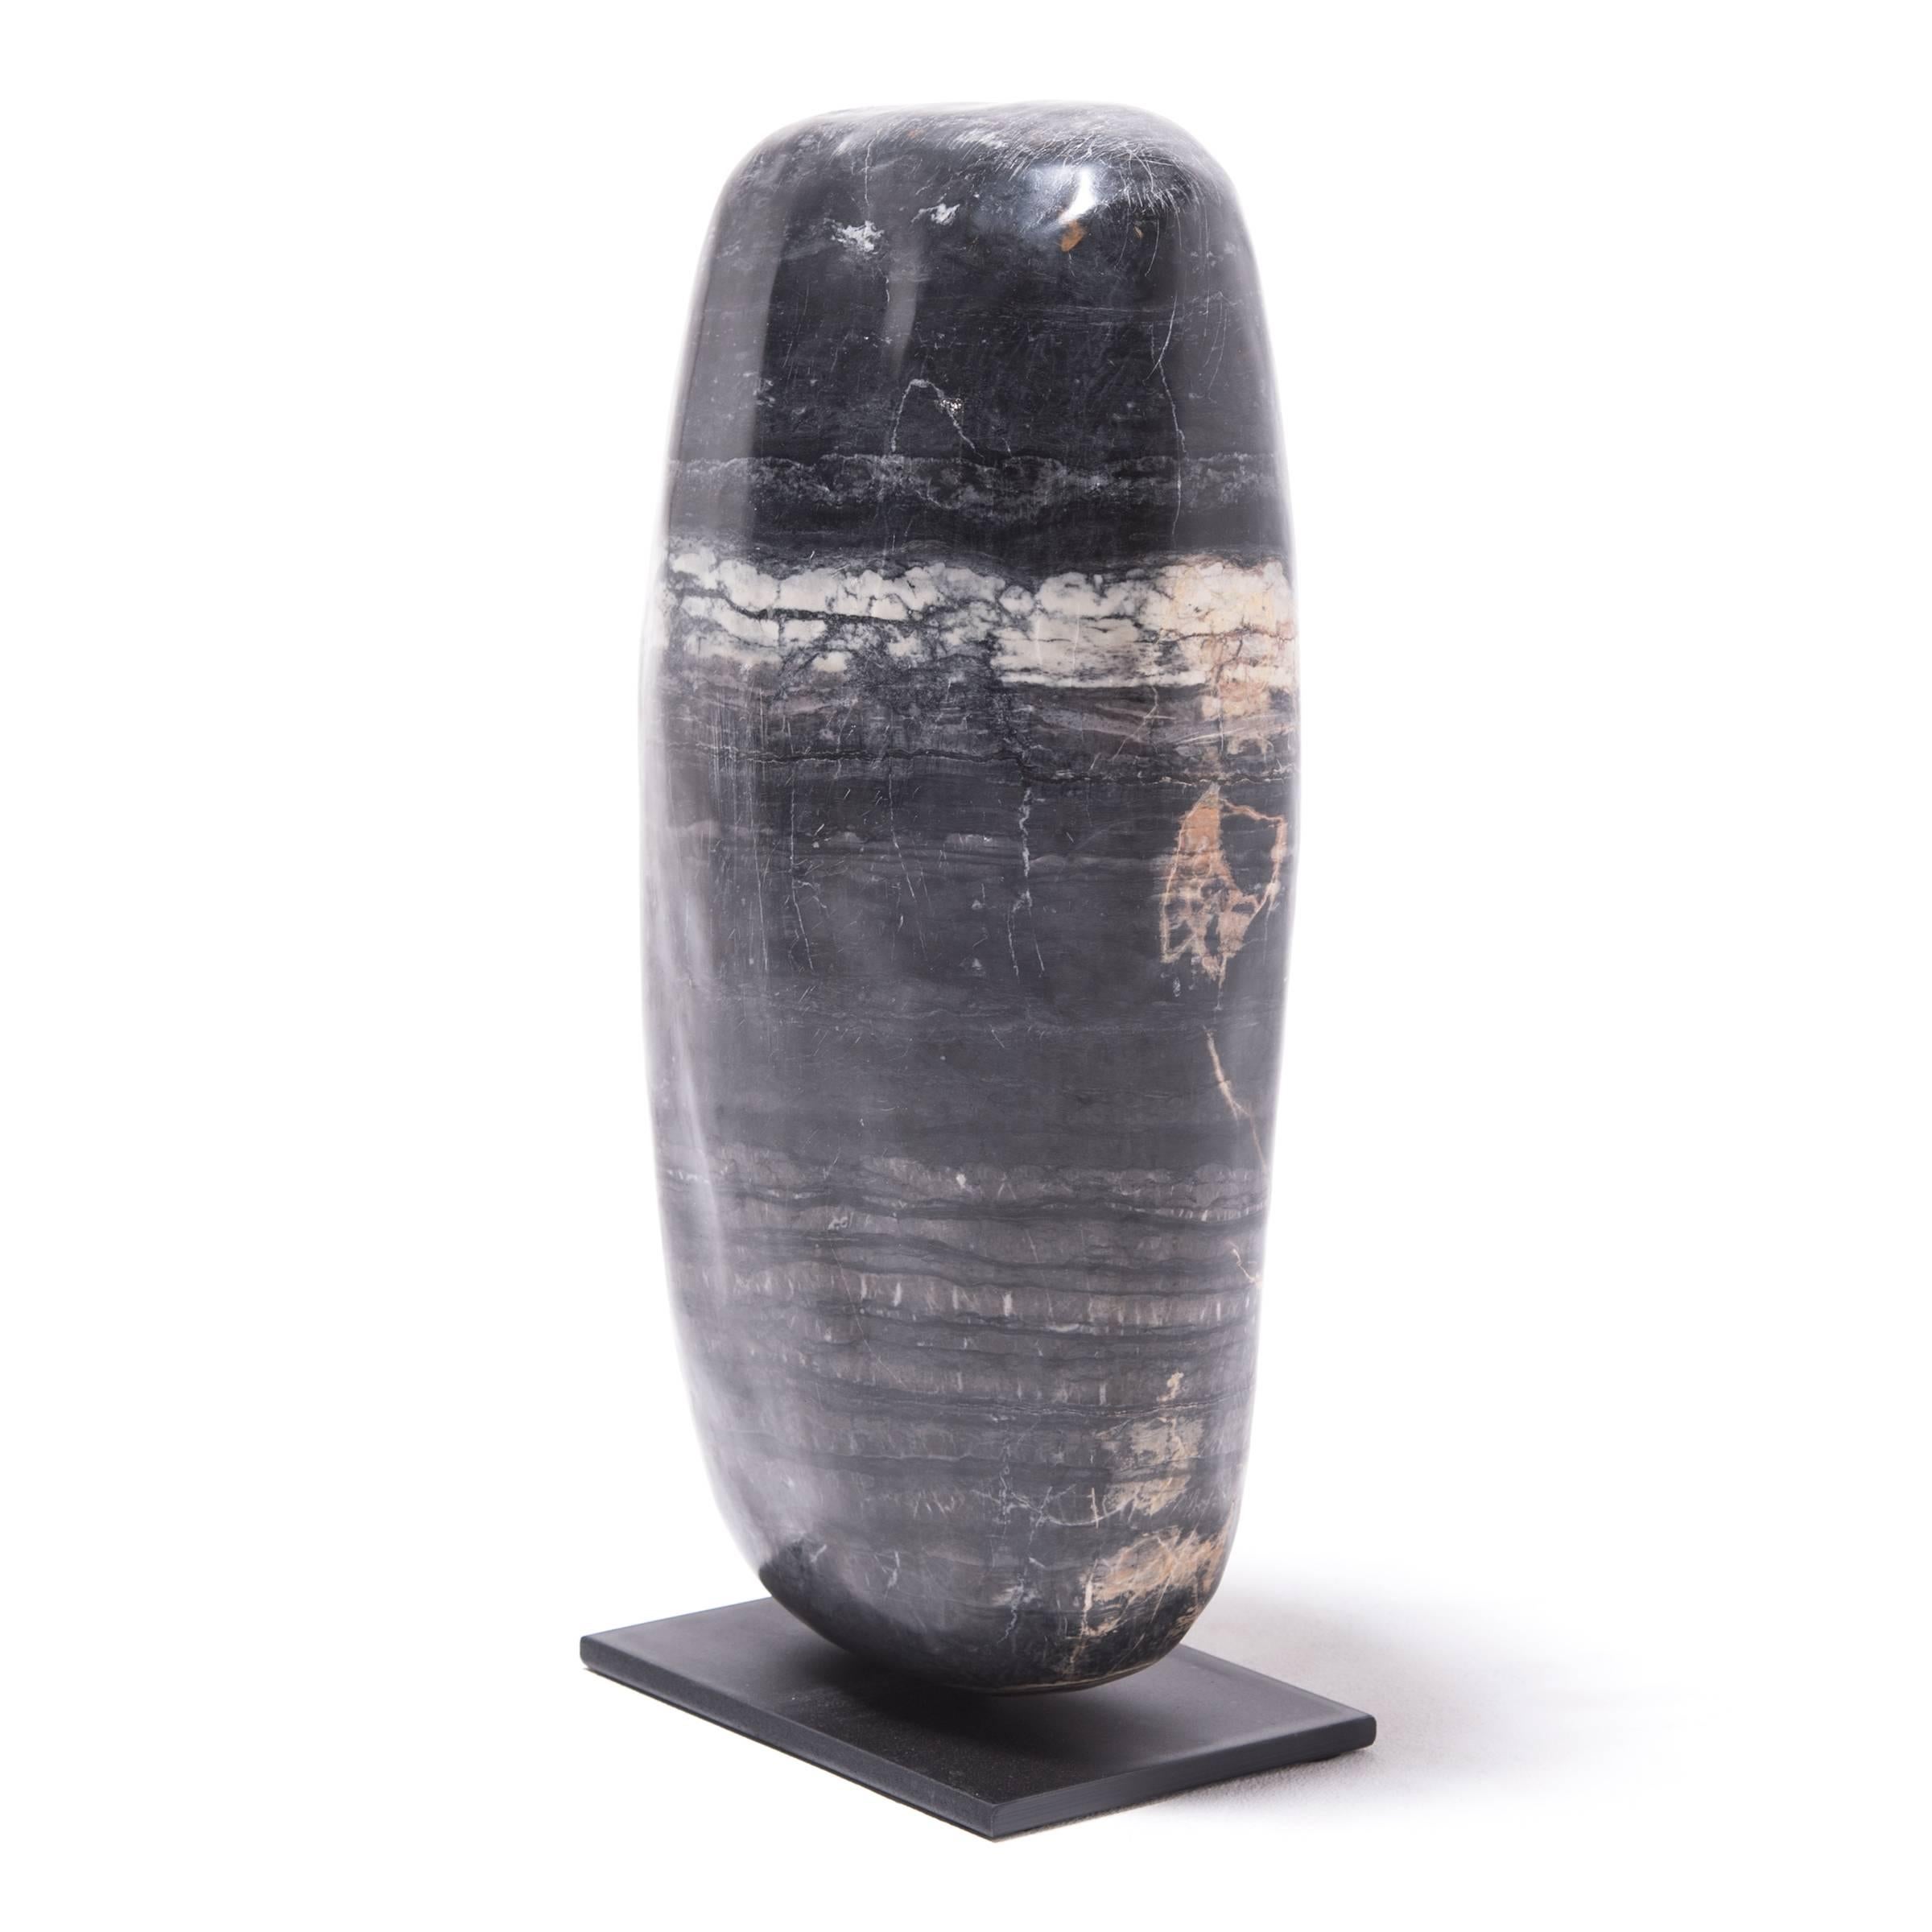 Scholar's rocks in ancient China were appreciated by artists, who collected them to inspire creativity. This stone from Shandong Province, with its natural stripes and juxtaposition of deep, dark colors and gentle tones, is thousands of years old,